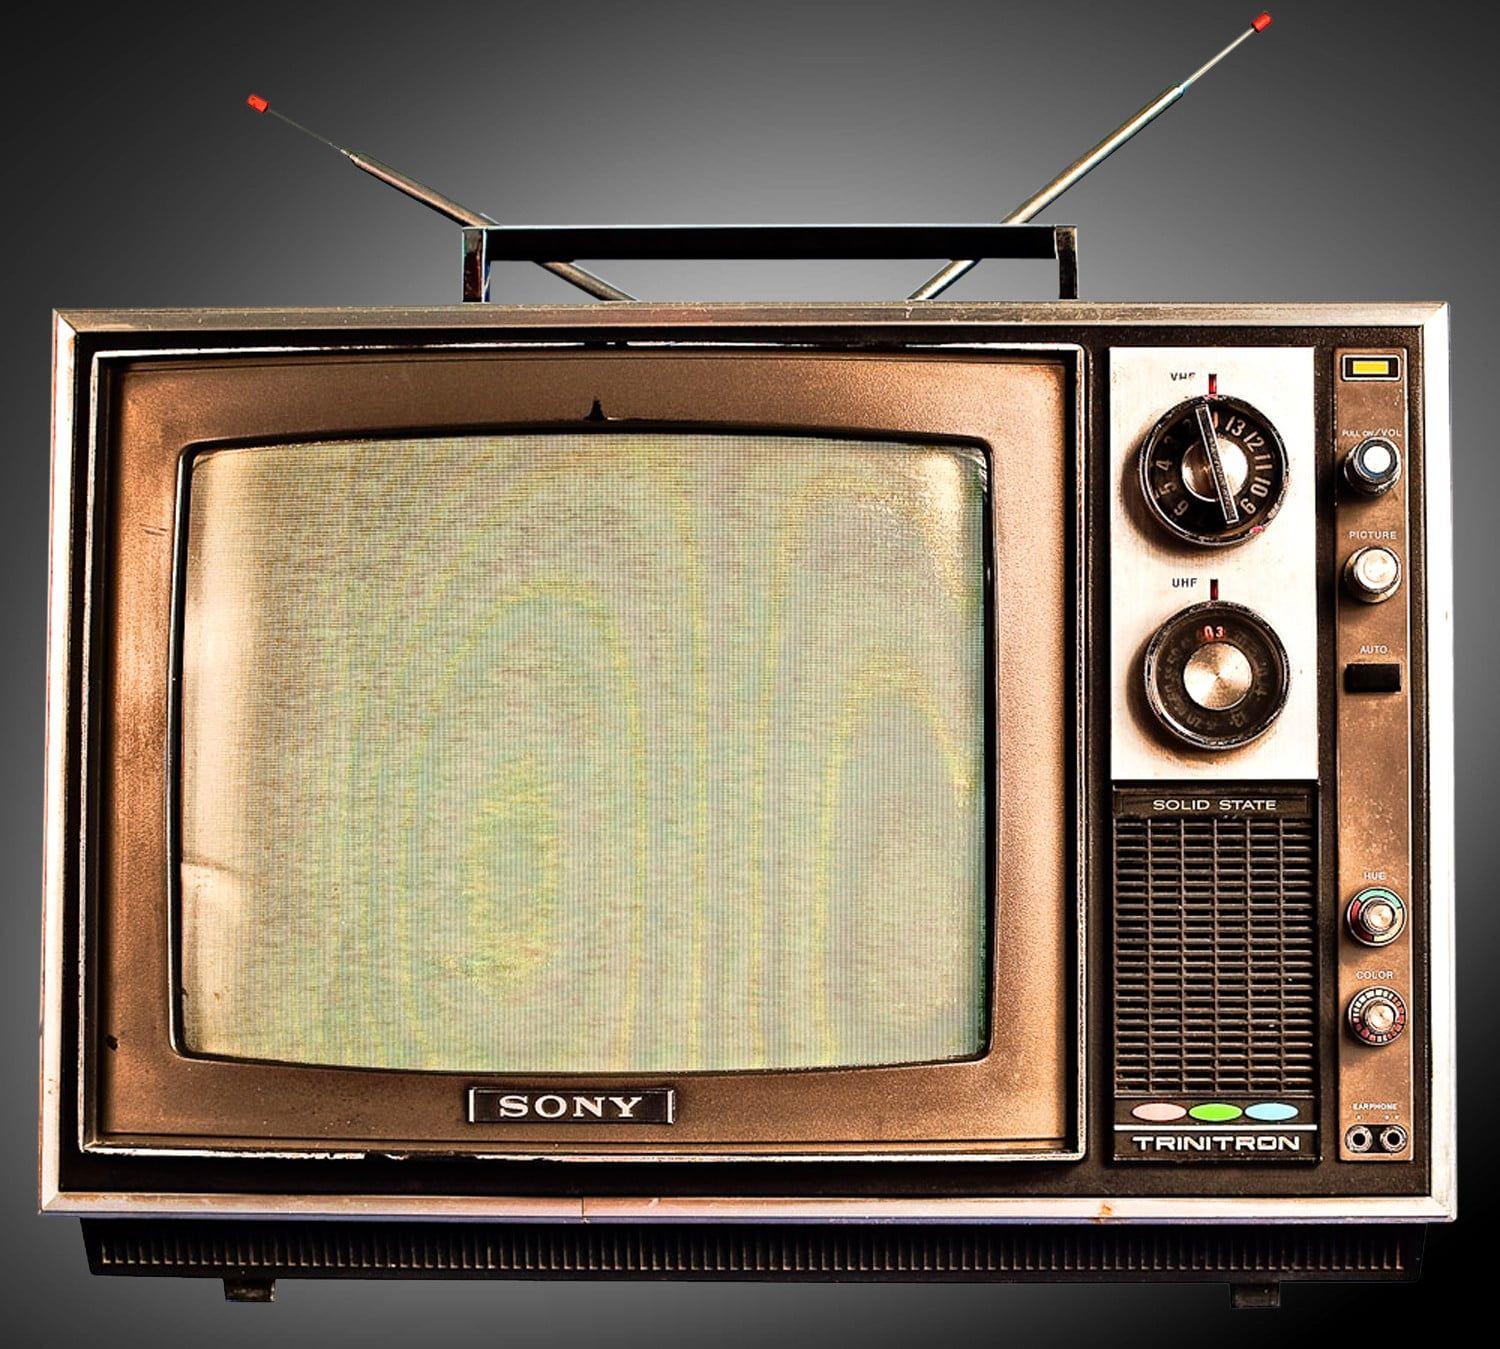 Antique Tv Wallpapers Top Free Antique Tv Backgrounds Wallpaperaccess